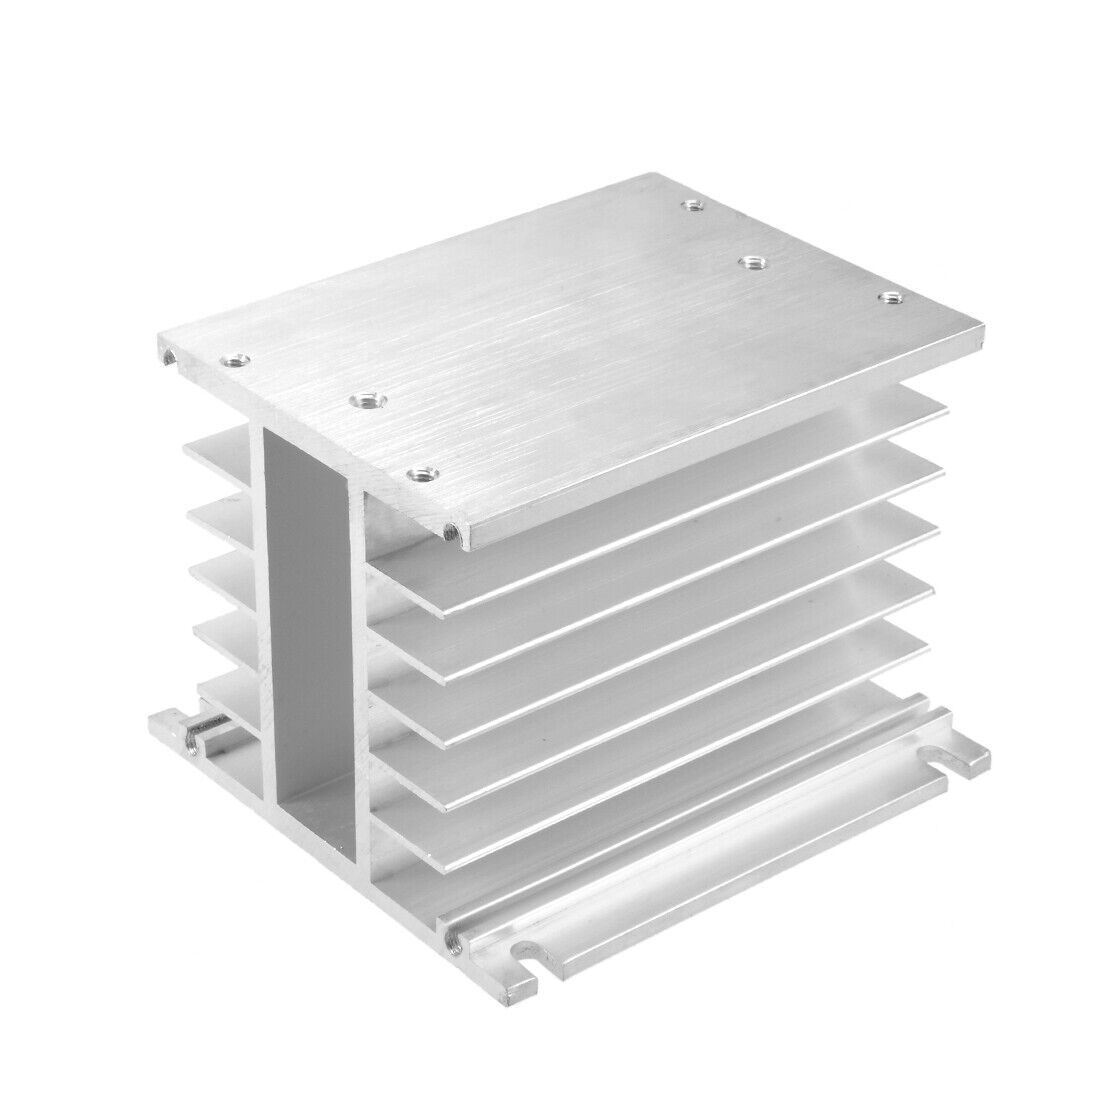 Aluminum Heat Sink SSR Dissipation for Three Phase Solid State Relay 10A-100A